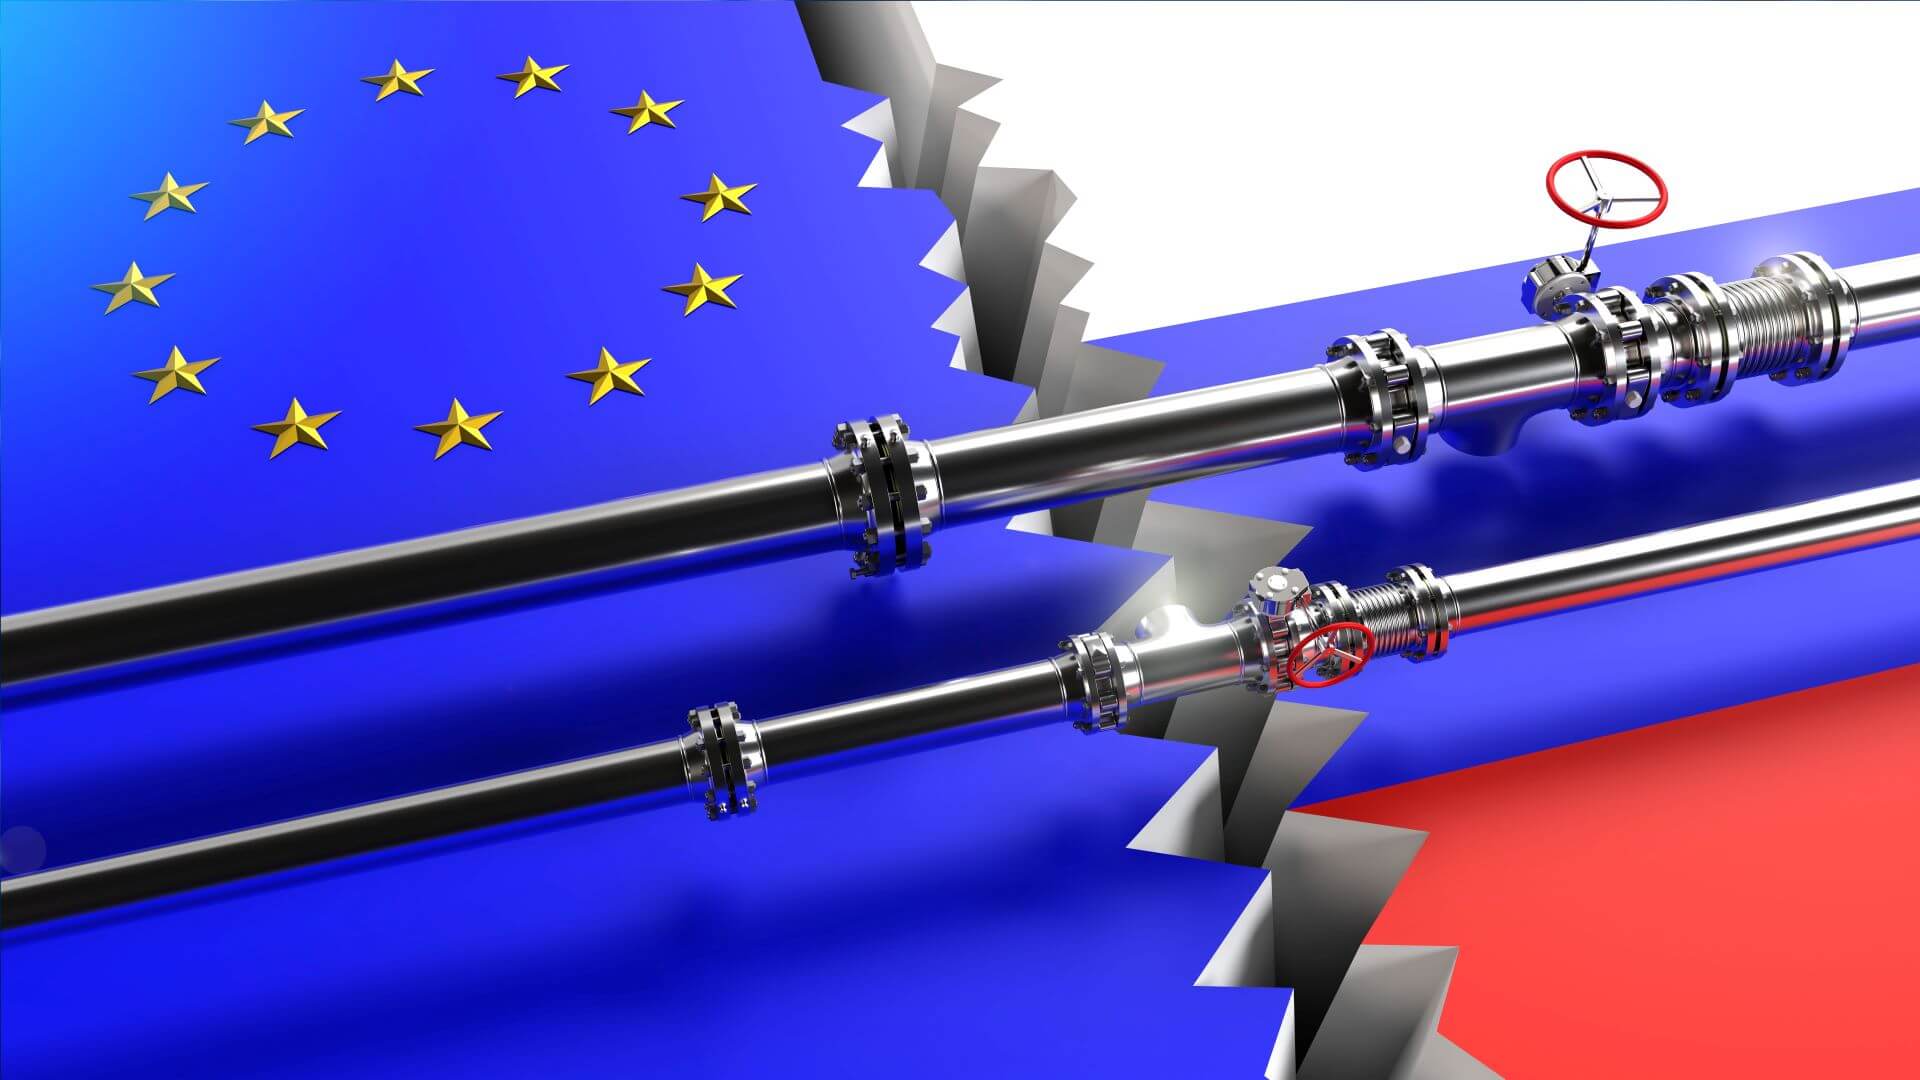 Artist's graphic of gas pipeline across fractured EU and Russian flags